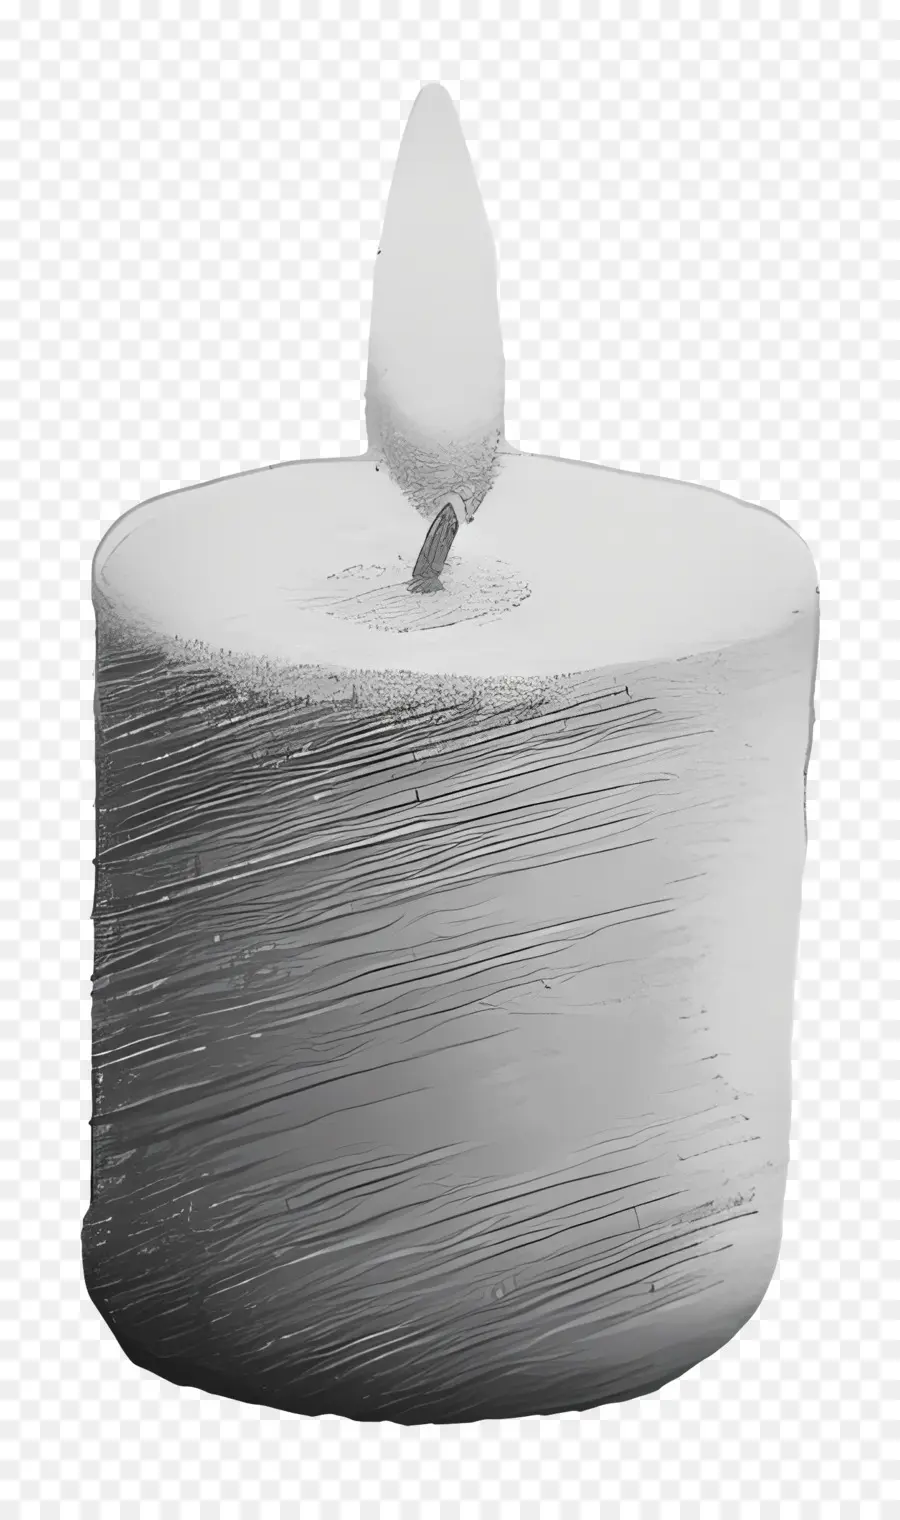 candlelight white candle black background flame flickering